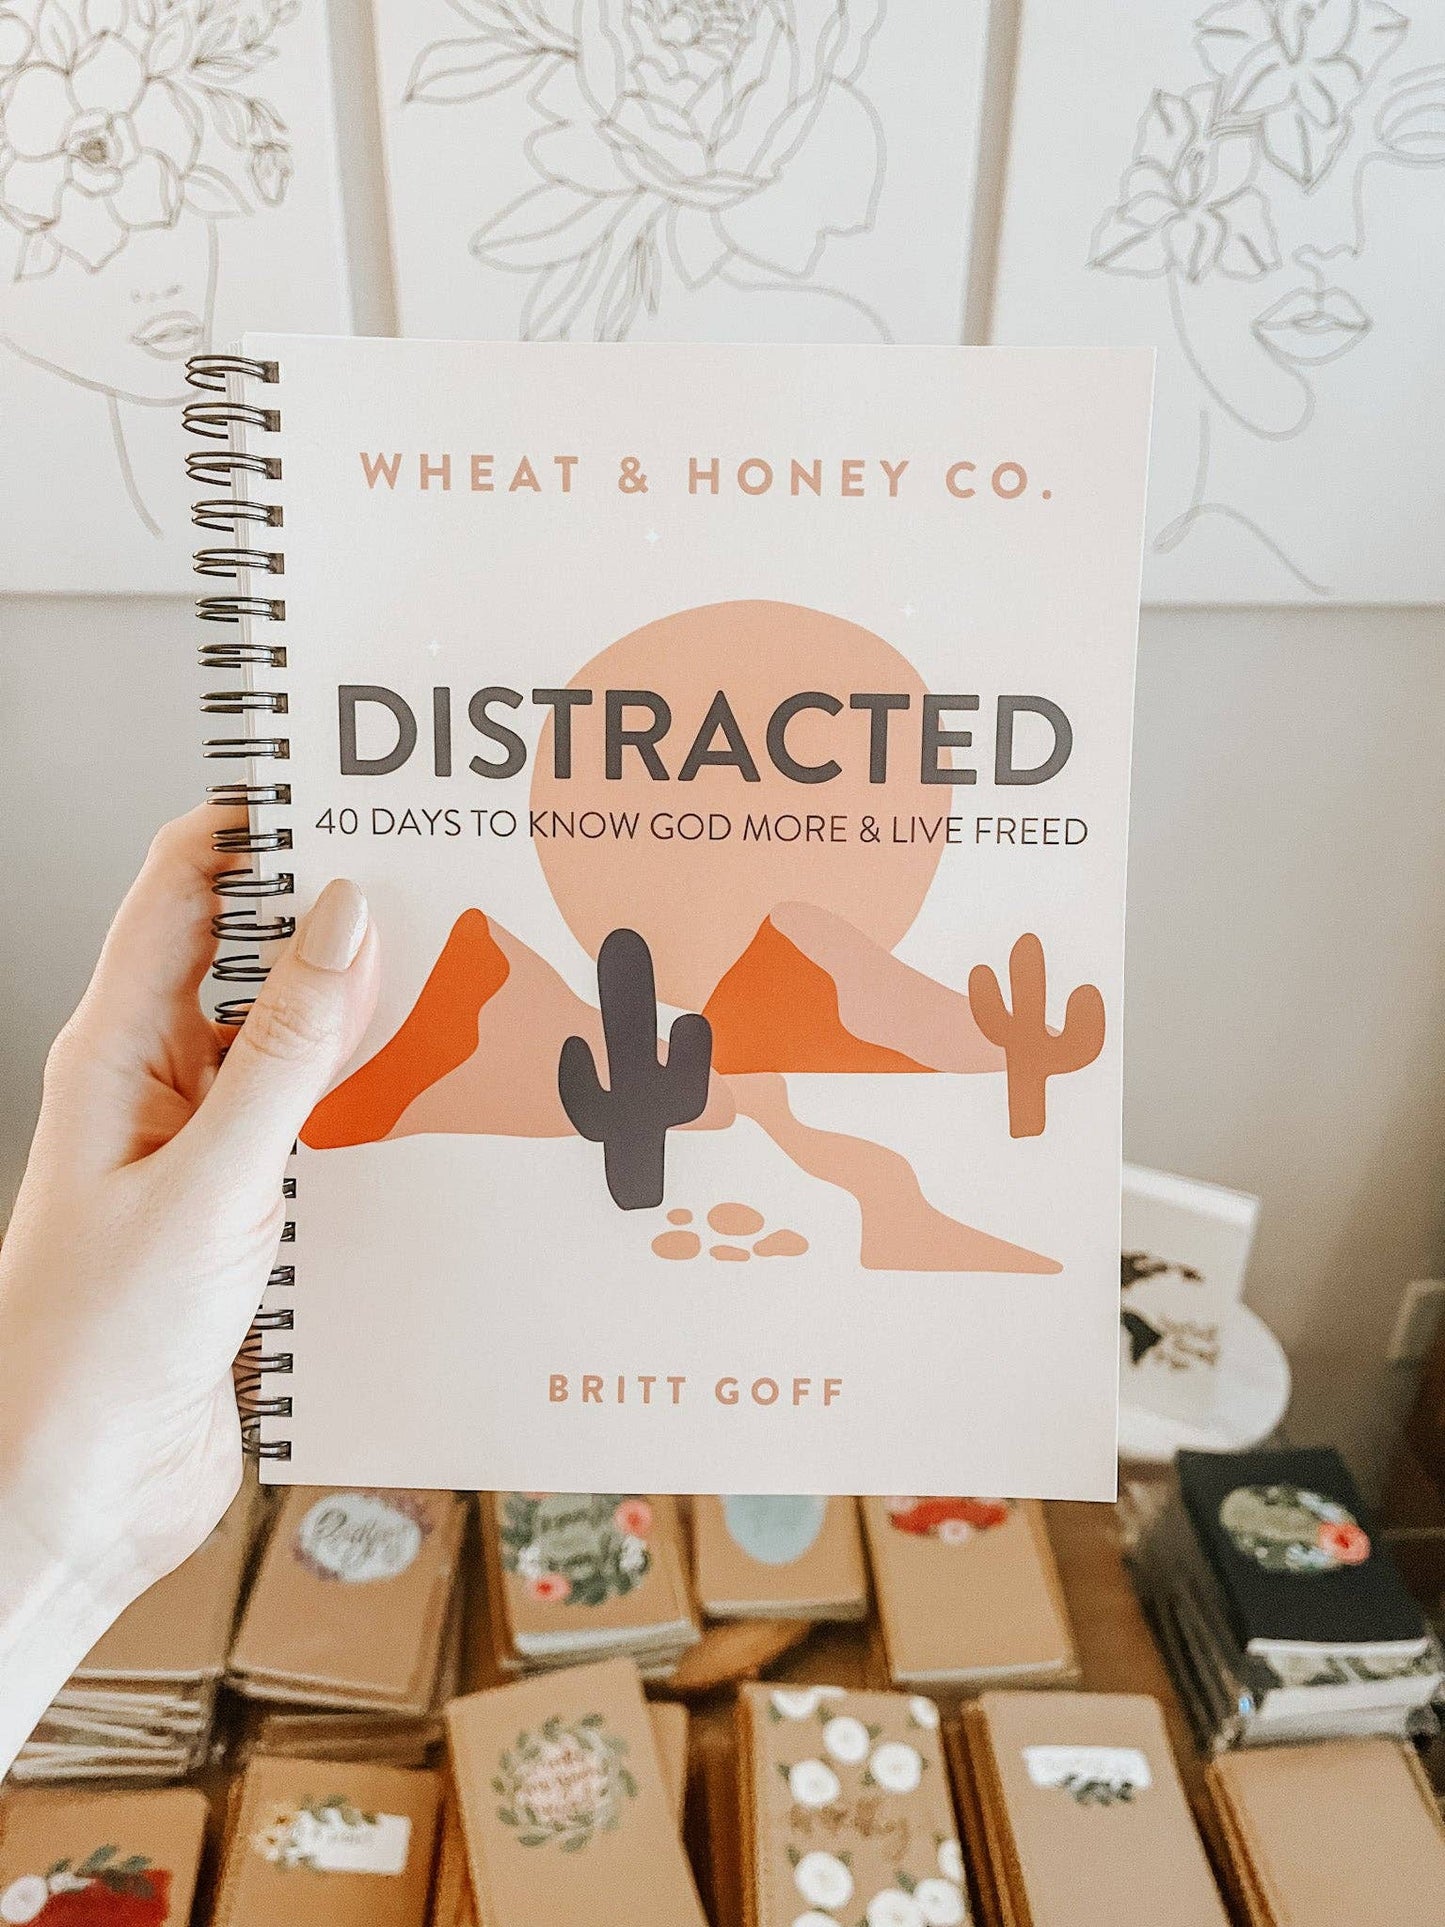 Wheat and Honey Co. - Distracted: 40 Days to know God more and live freed